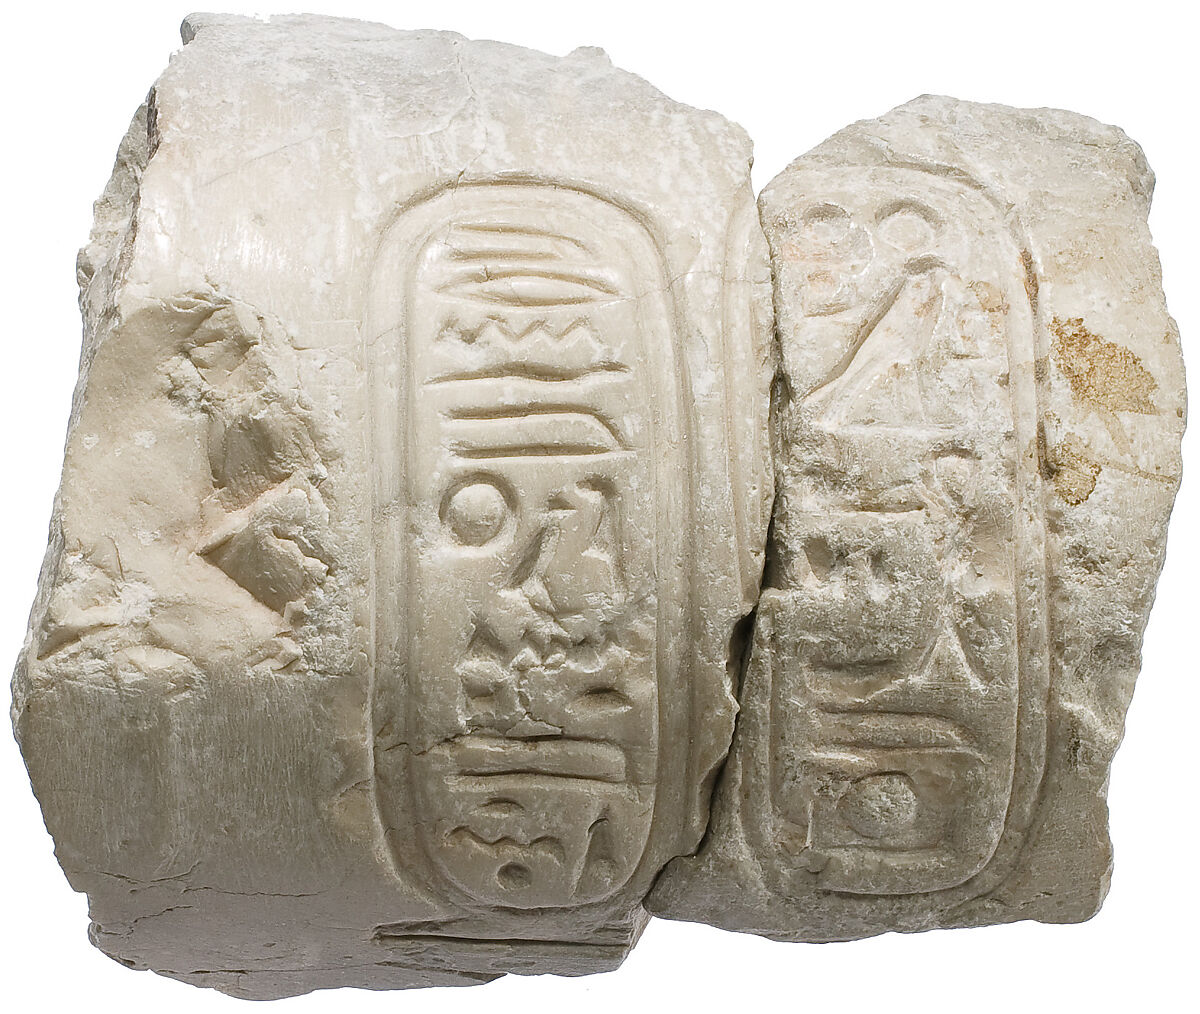 Arm with garment, Aten cartouches, Indurated limestone 